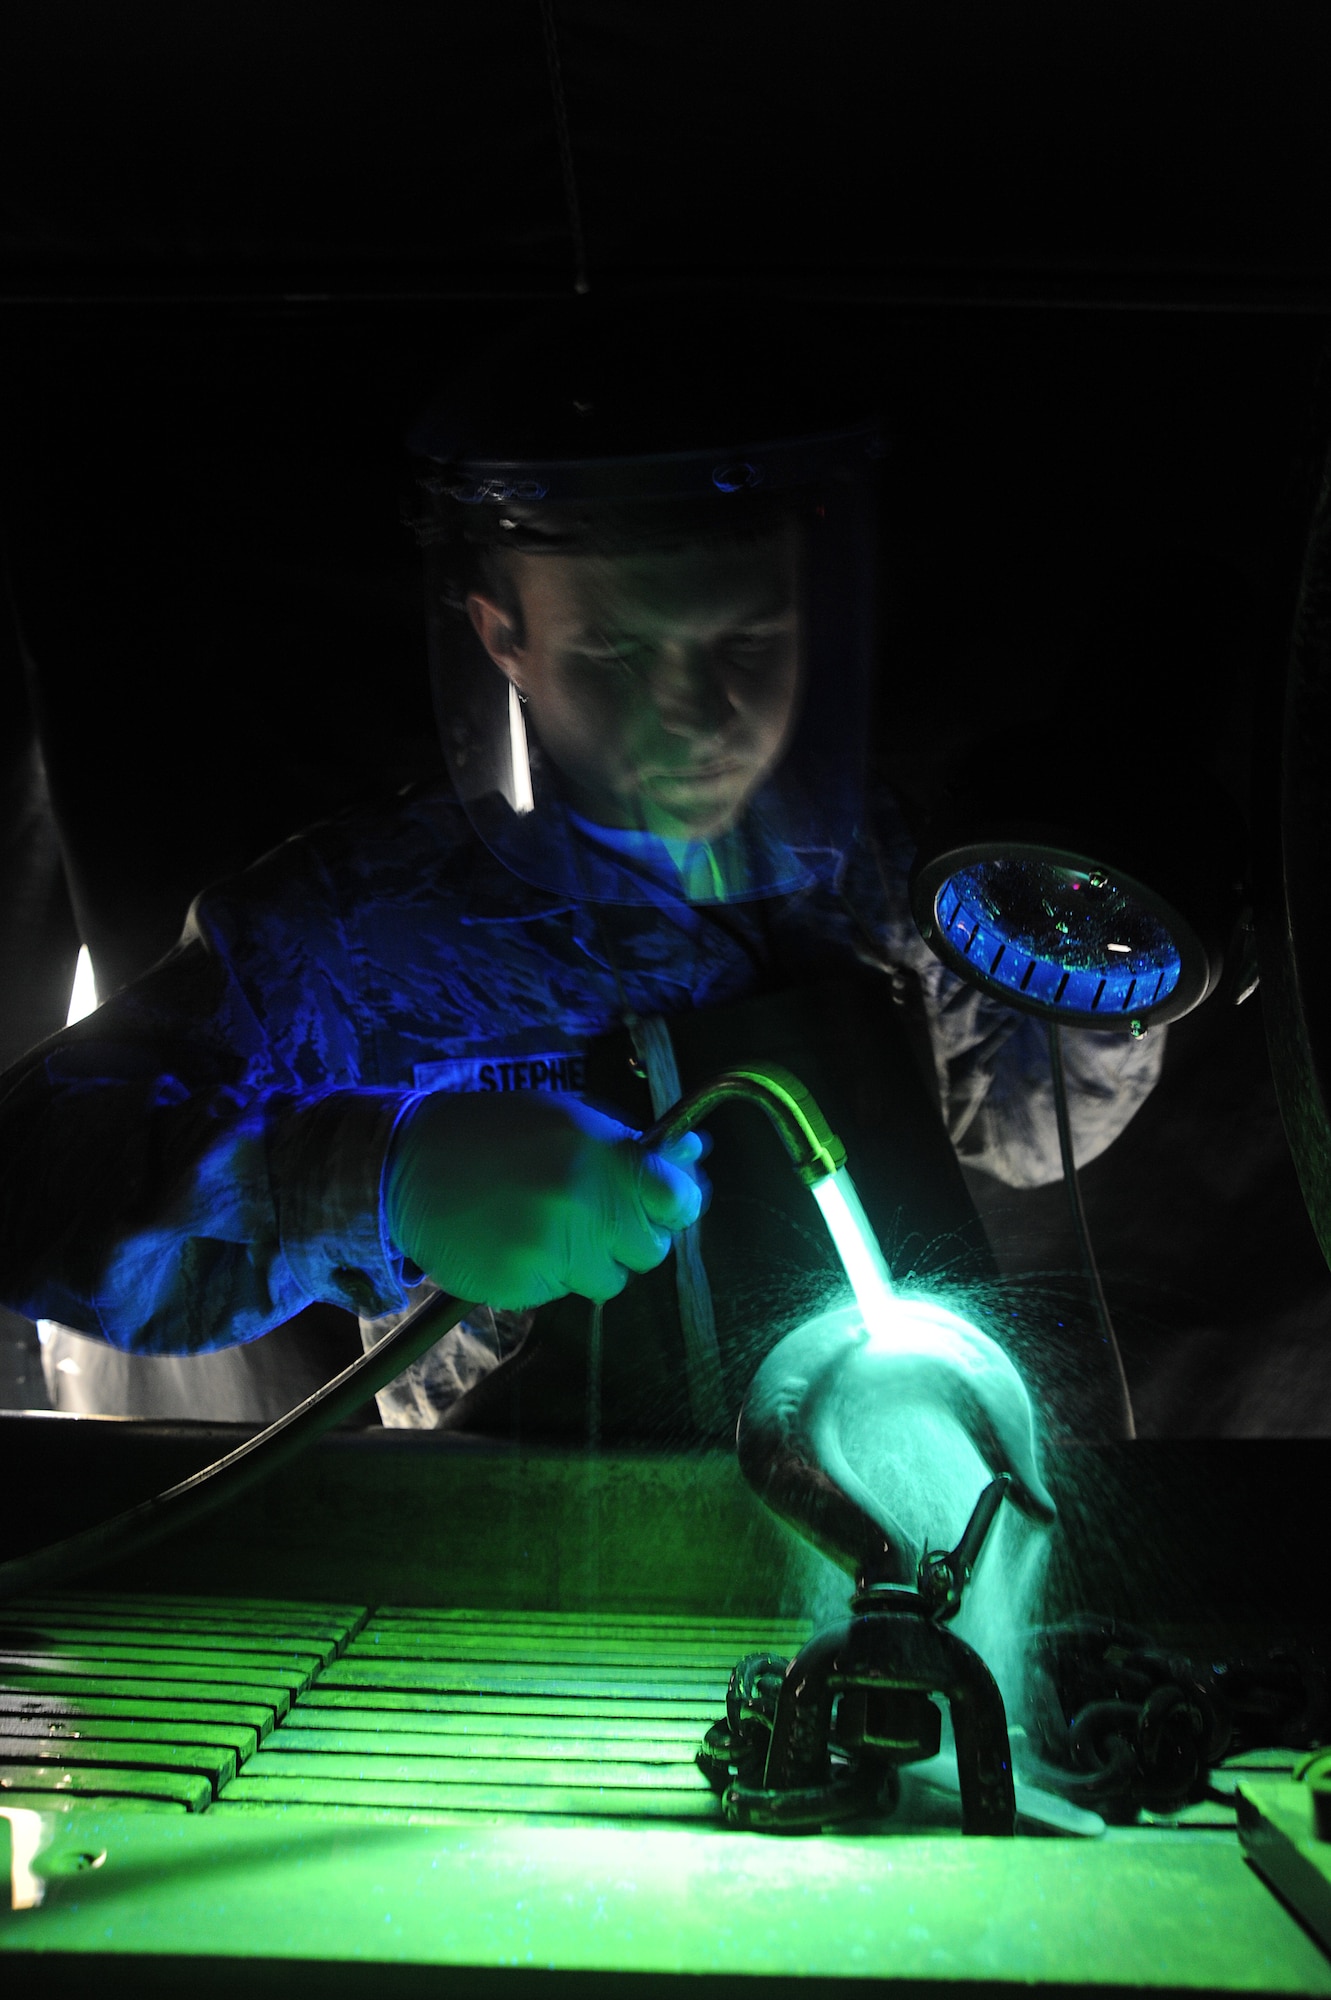 Senior Airman Chase Stephans, 509th Maintenance Squadron non-destructive inspection technician, uses a black light to inspect an aircraft part at Whiteman Air Force Base, Mo., May 8, 2014. The black light causes particles normally unseen by the human eye to become florescent.(U.S. Air Force photo by Senior Airman Bryan Crane/Released)